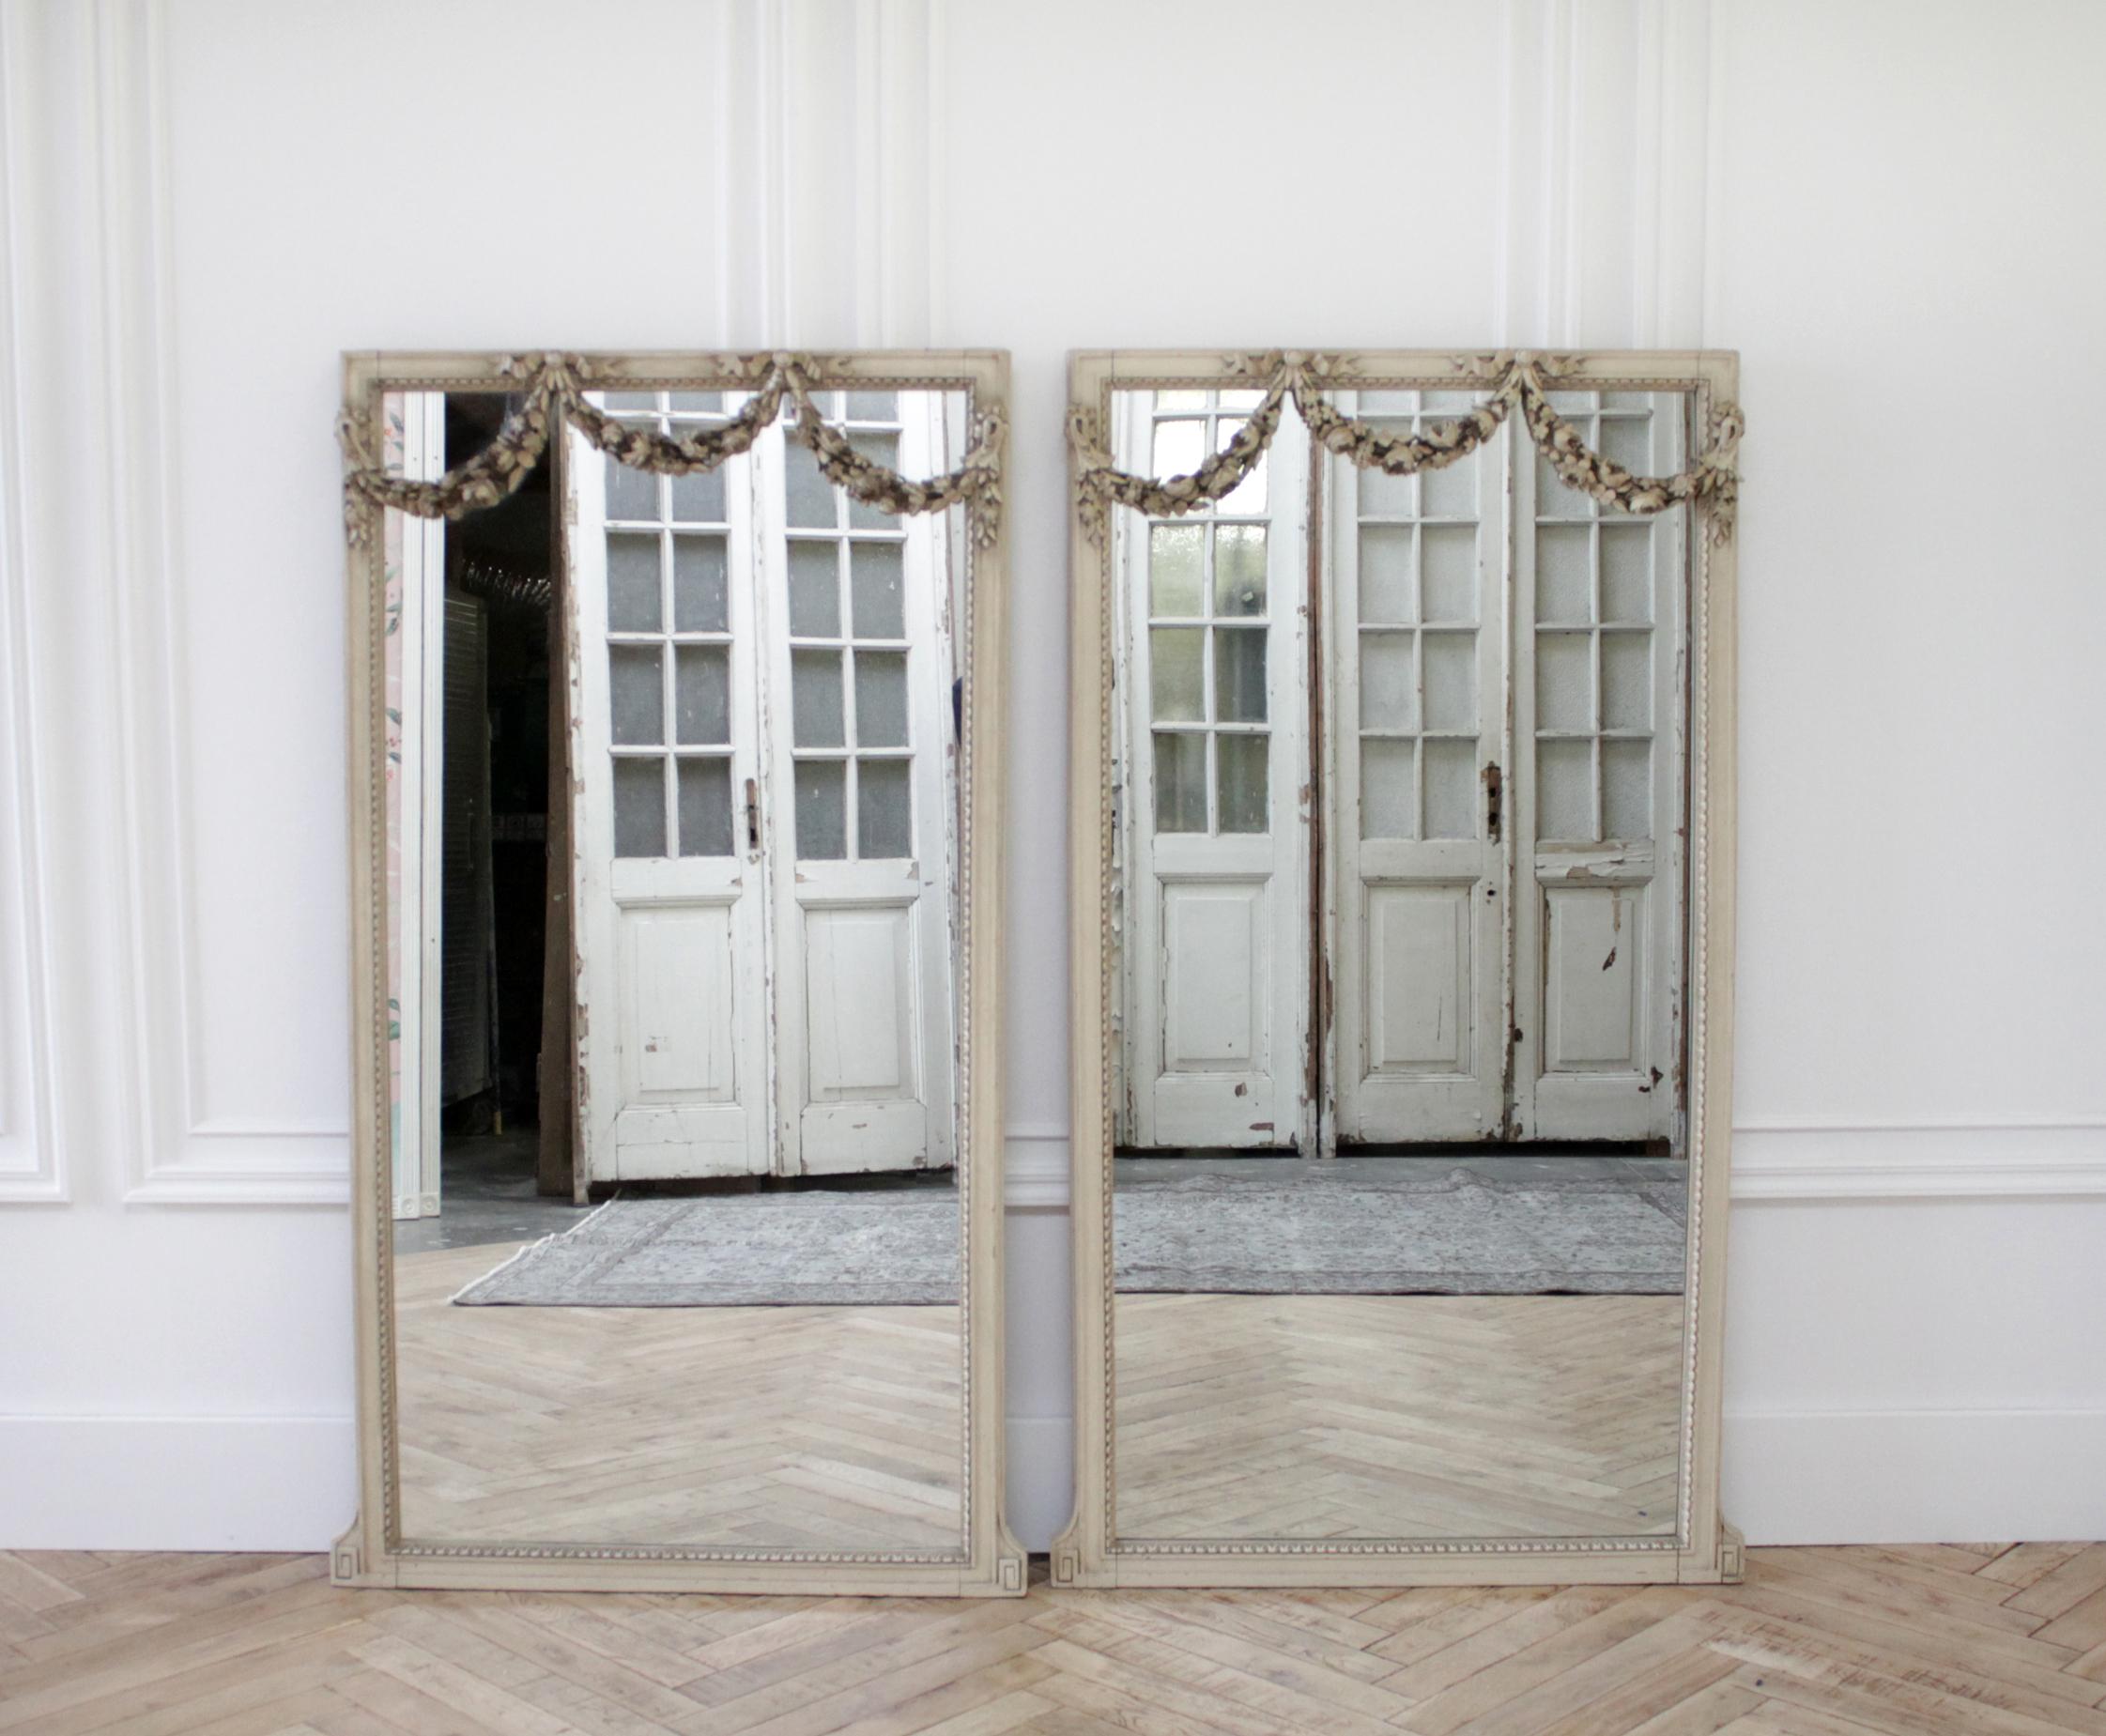 20th century painted and carved french style mirrors
Sold individually these beautiful mirrors have the original patina painted finish. A grayish-tone colored paint, with subtle distressed edges. Large carved wood rose swags scallop over the fronts